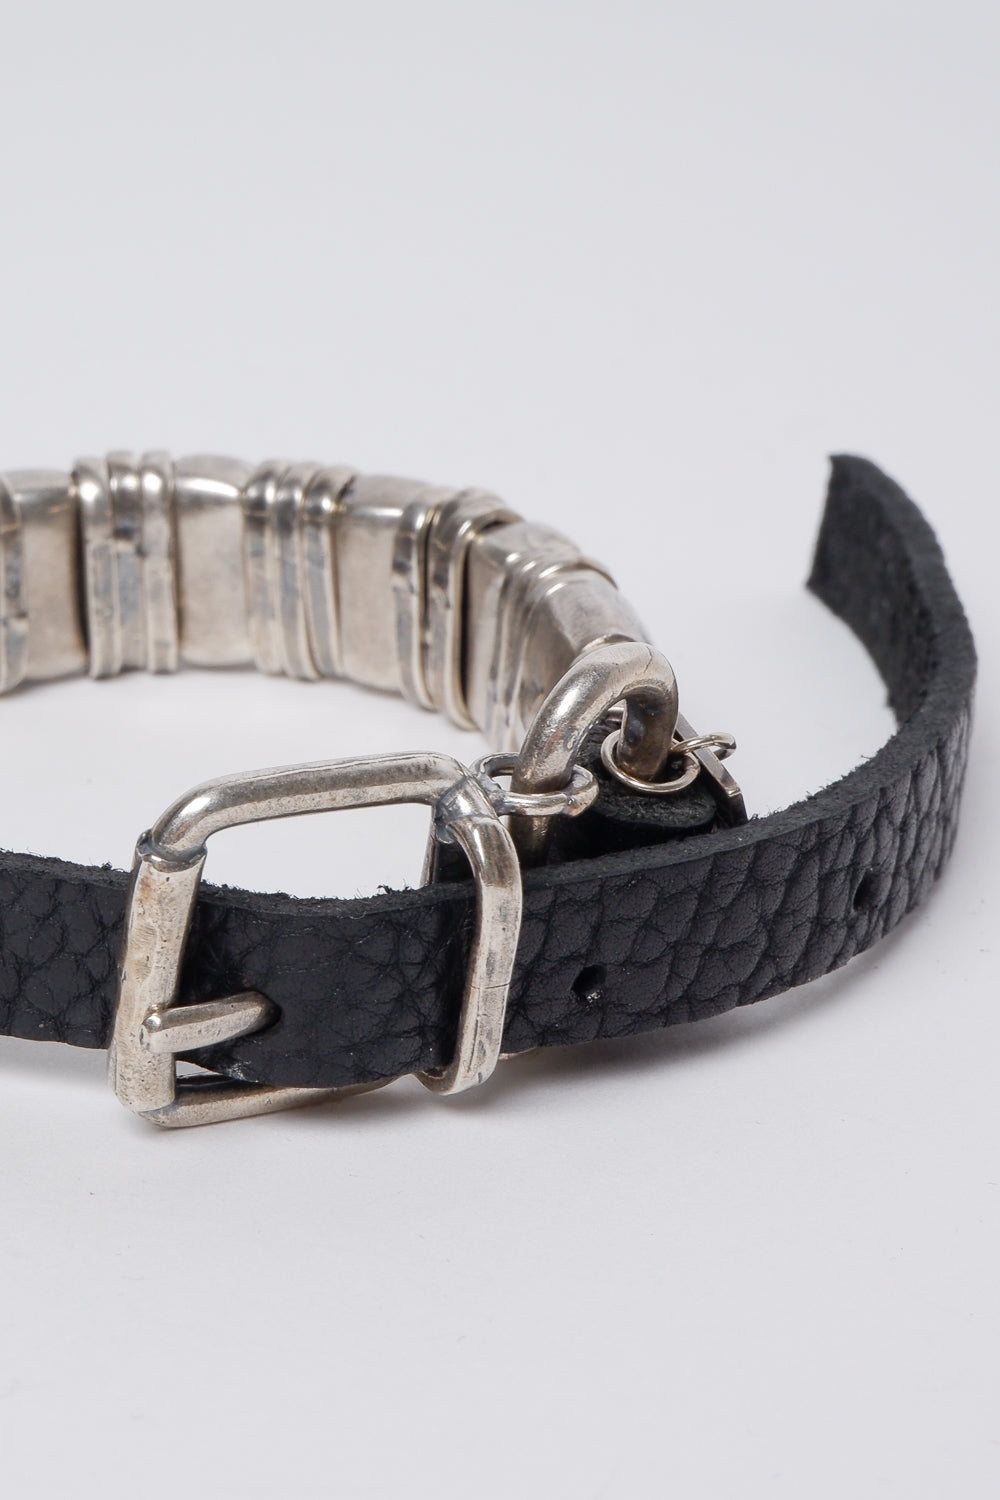 Buy the BR2208 Bracelet at Intro. Spend £50 for free UK delivery. Official stockists. We ship worldwide.